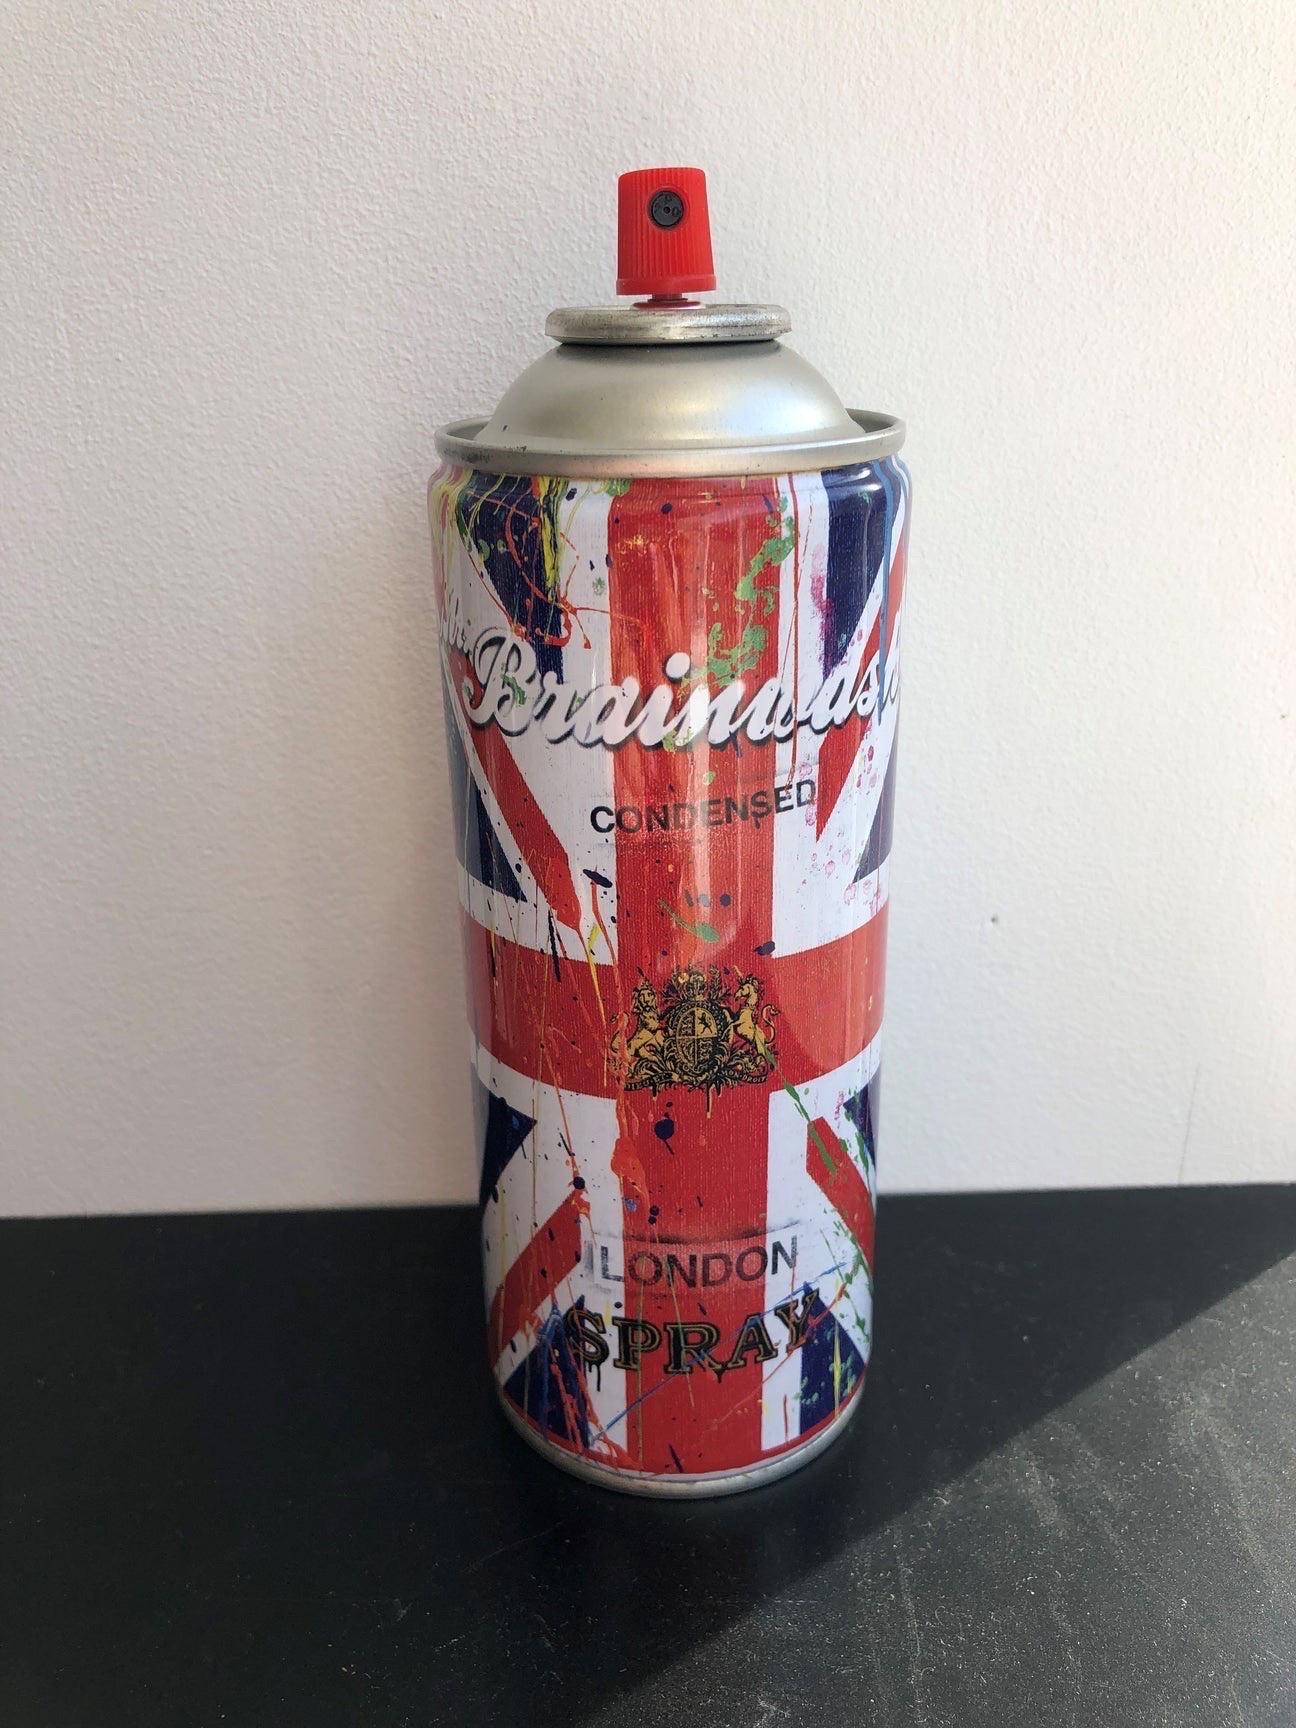 Mr Brainwash, Spray Can ‘Life is Beautiful’ London, 2012

From Life Is Beautiful London Show in 2012

6 x 20 cm (2.36 x 7.87 in) 

Printed signature

The can is empty of paint and gas.
